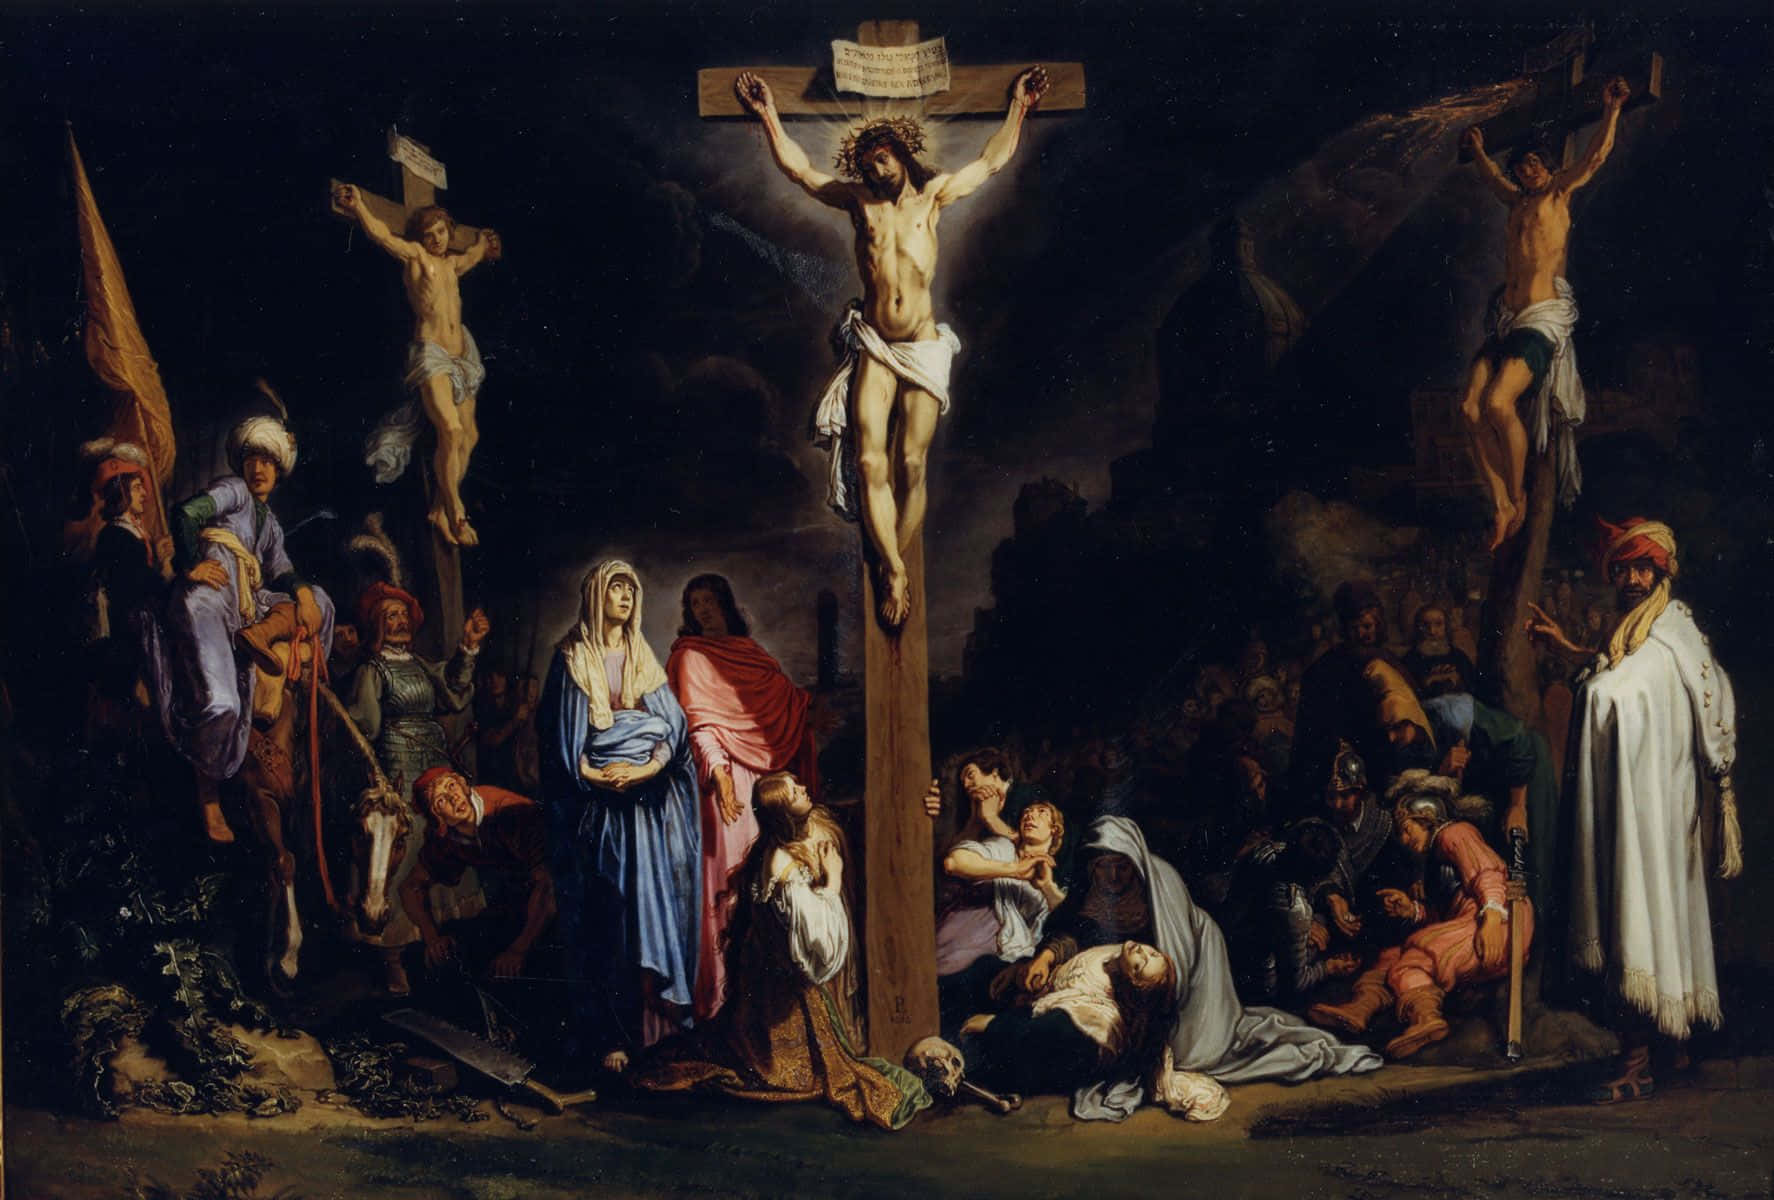 A powerful depiction of Jesus' crucifixion on a cross Wallpaper